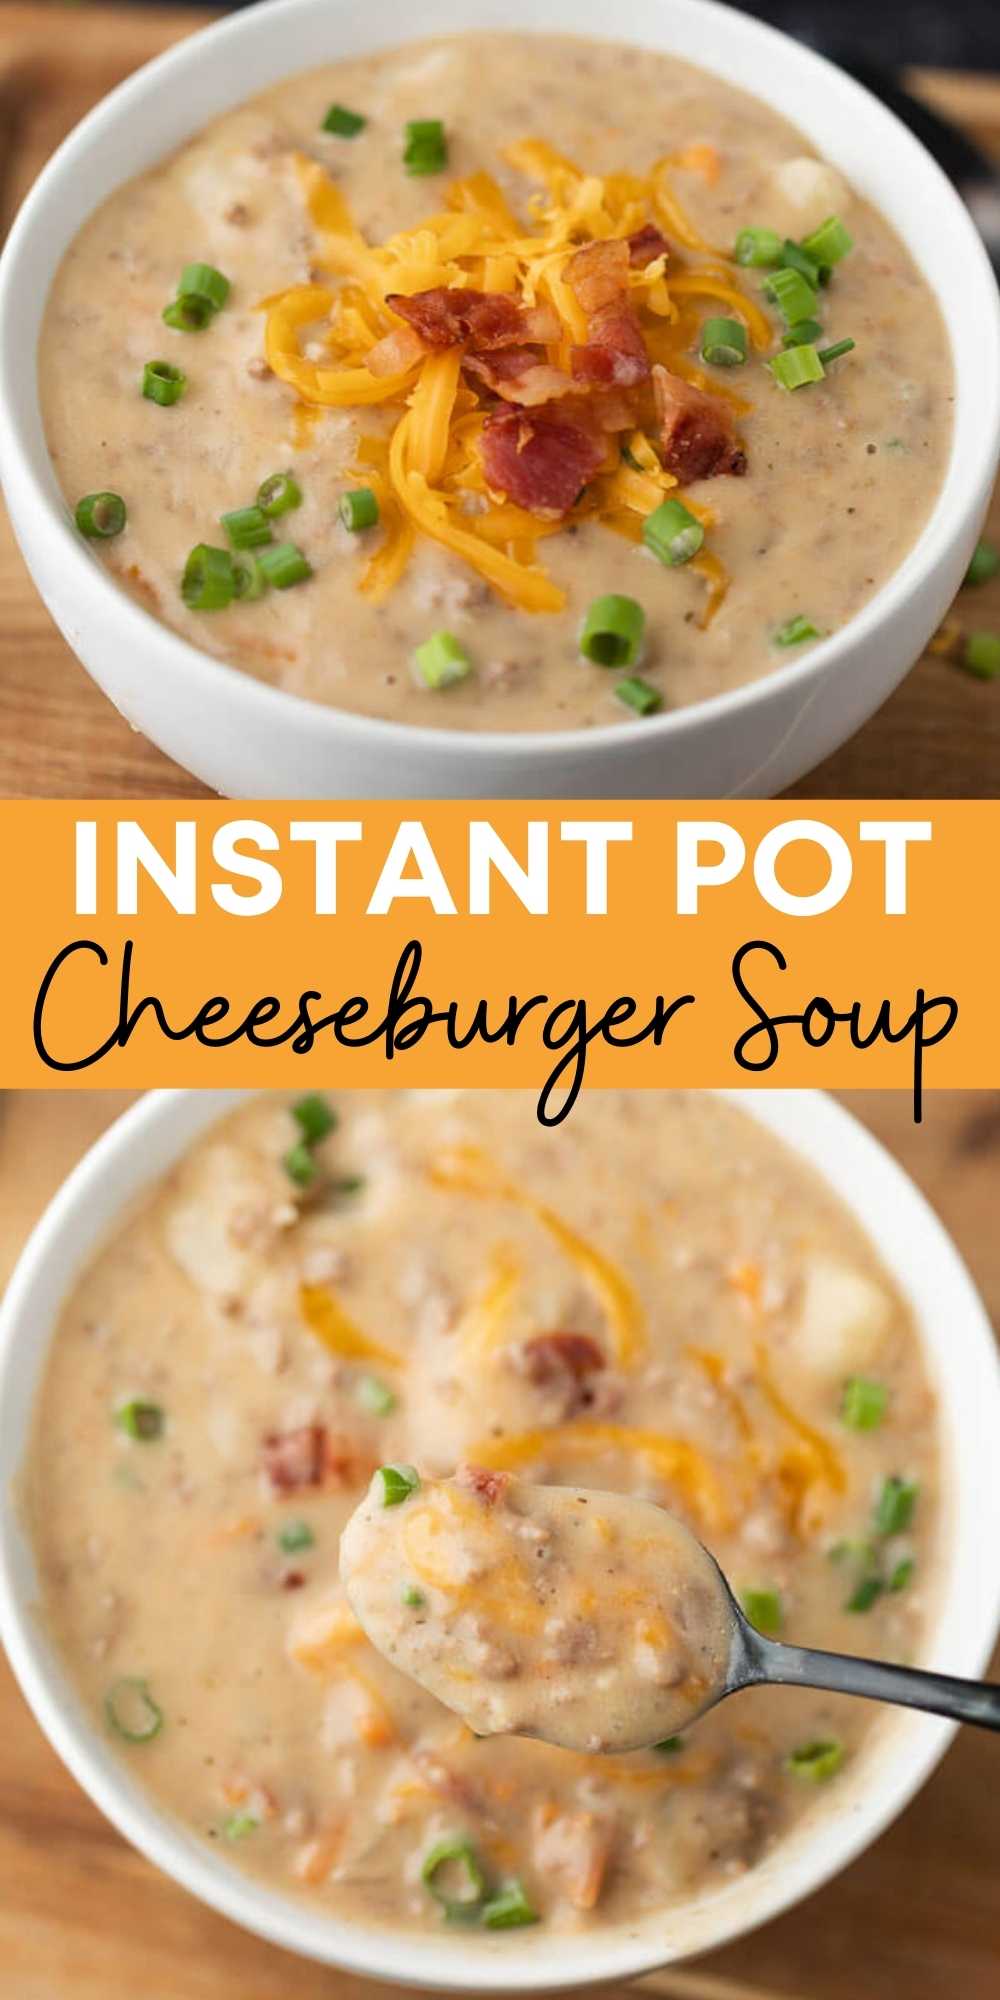 Instant Pot Cheeseburger Soup is a creamy and cheesy soup loaded with potatoes, ground beef, carrots and much more!  You will love this easy and simple, hearty soup recipe.  This pressure cooker cheeseburger soup is easy to make and packed with flavor too!  #eatingonadime #instantpotrecipes #souprecipes #pressurecookerrecipes 